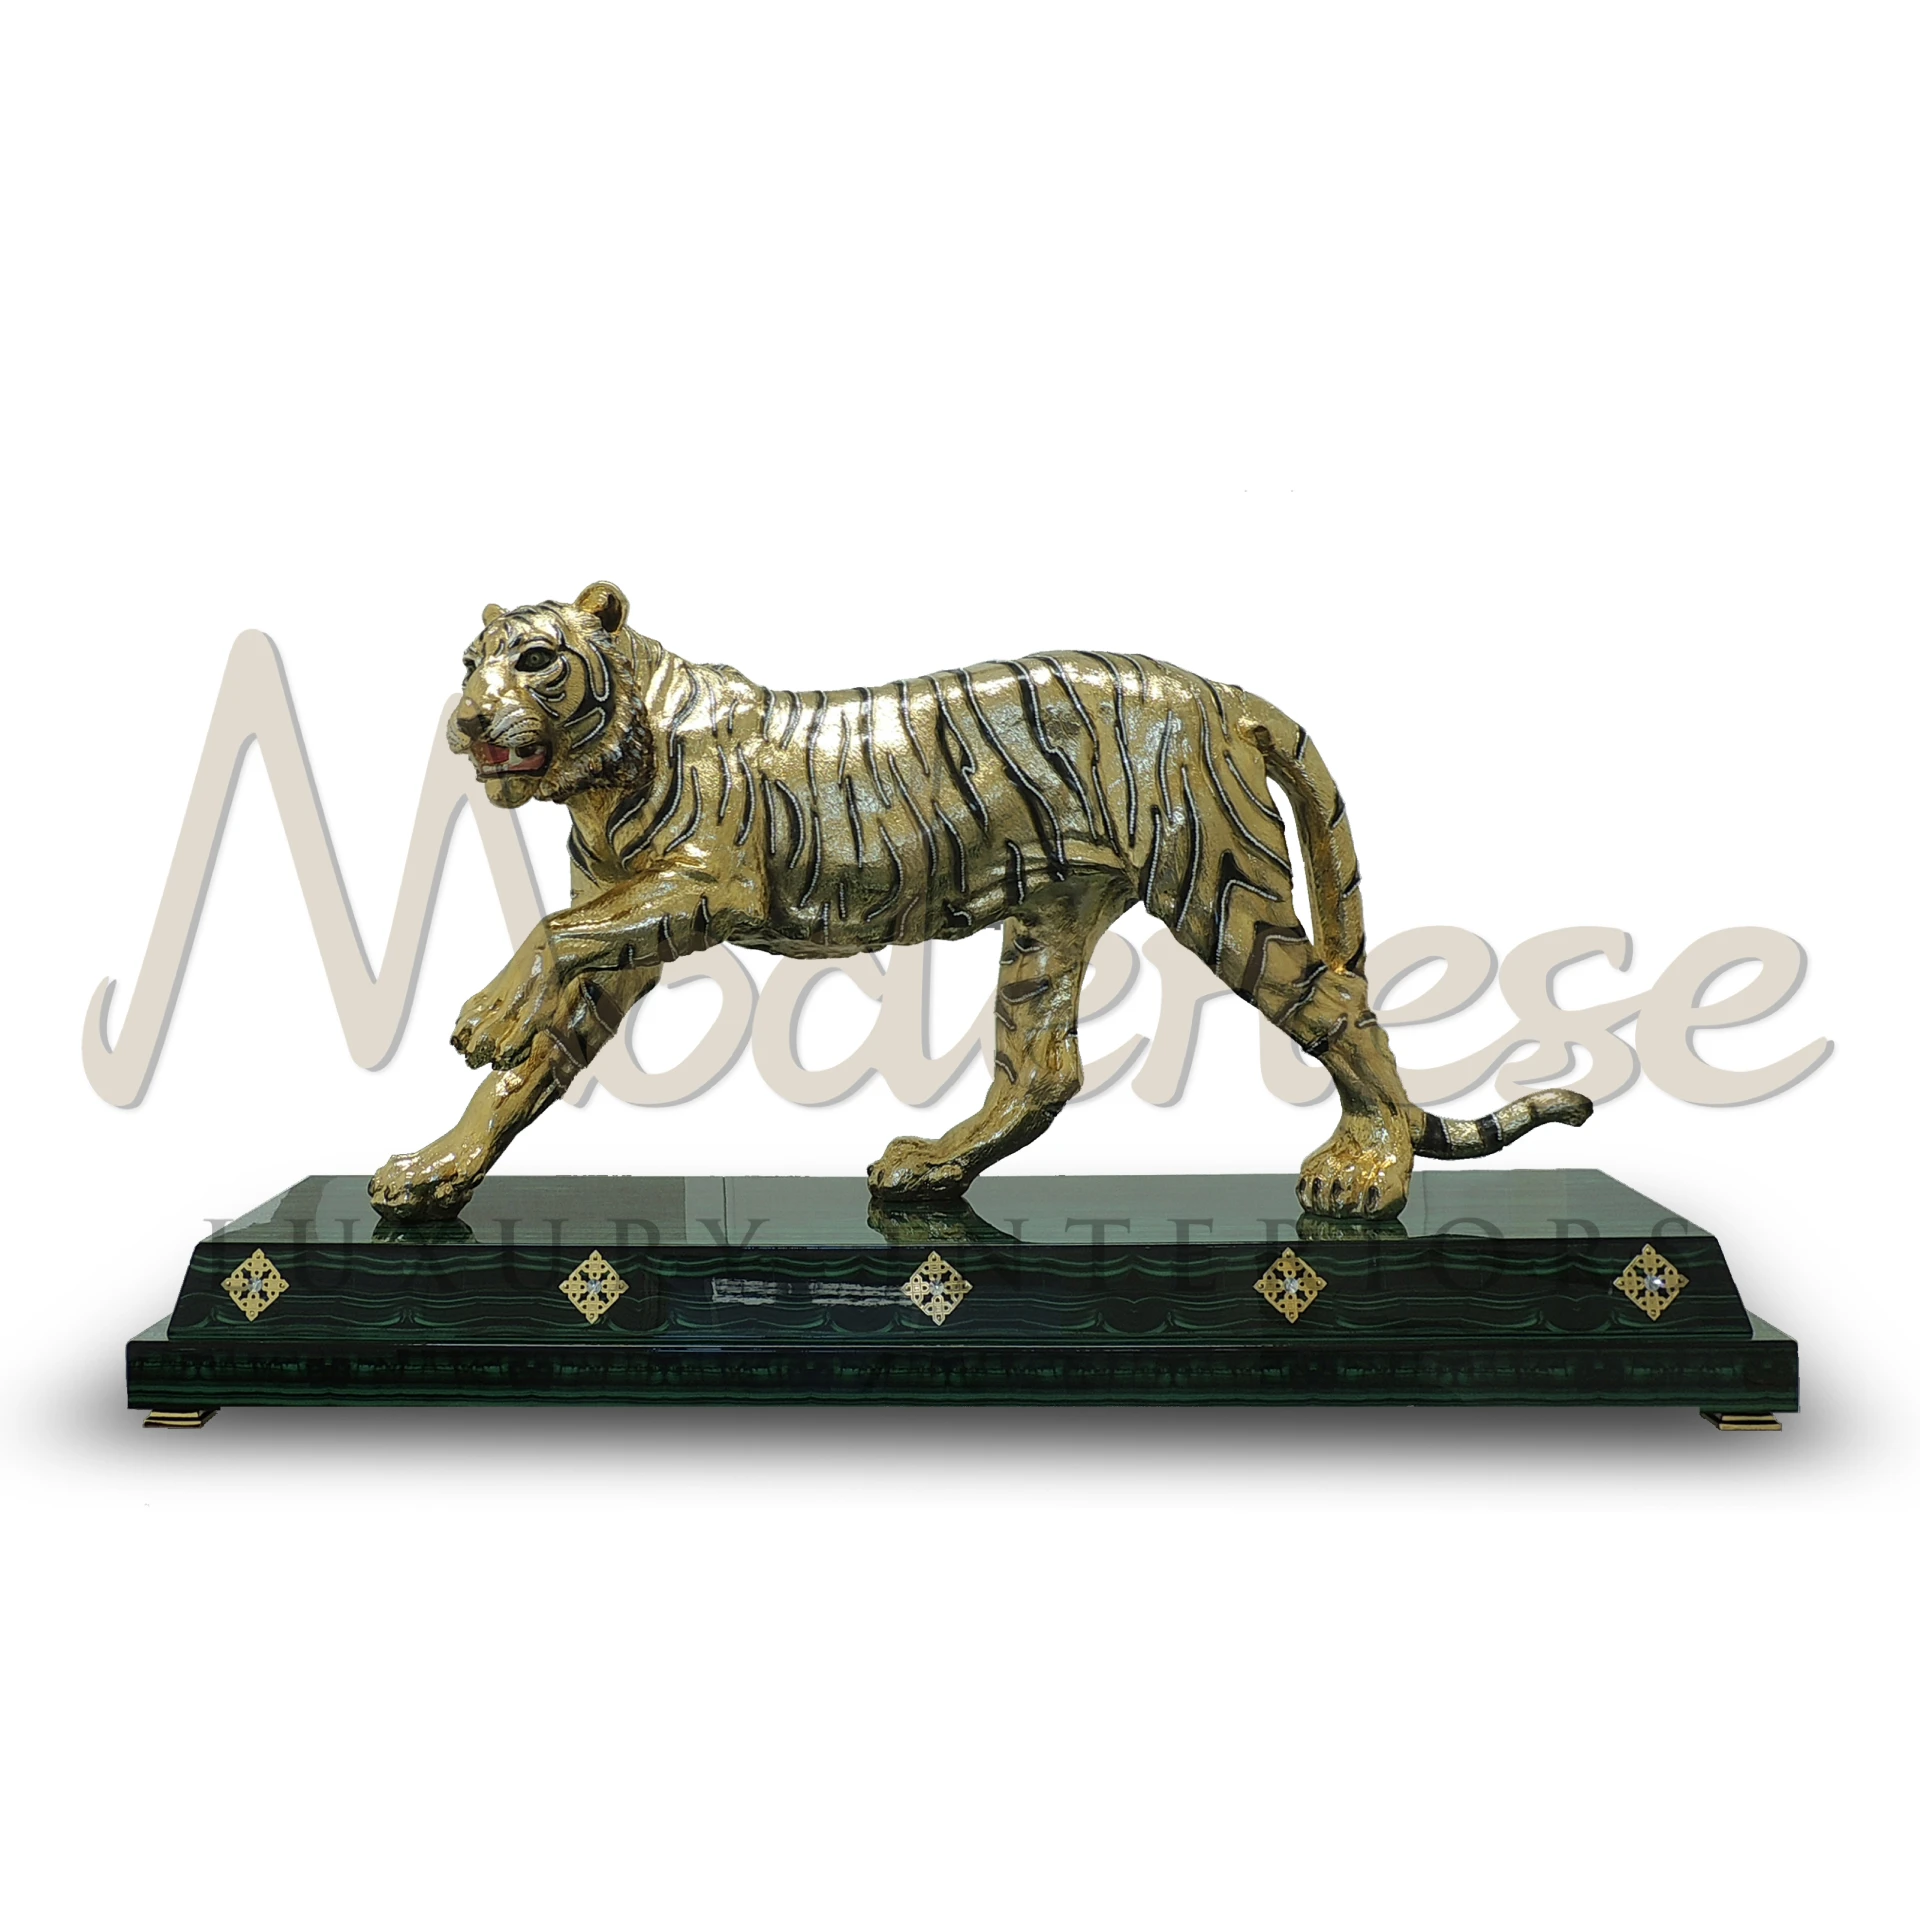 Elegant Royal Tiger Sculpture, intricately detailed in brass or bronze, embodying the regal essence of the tiger in luxury home settings.